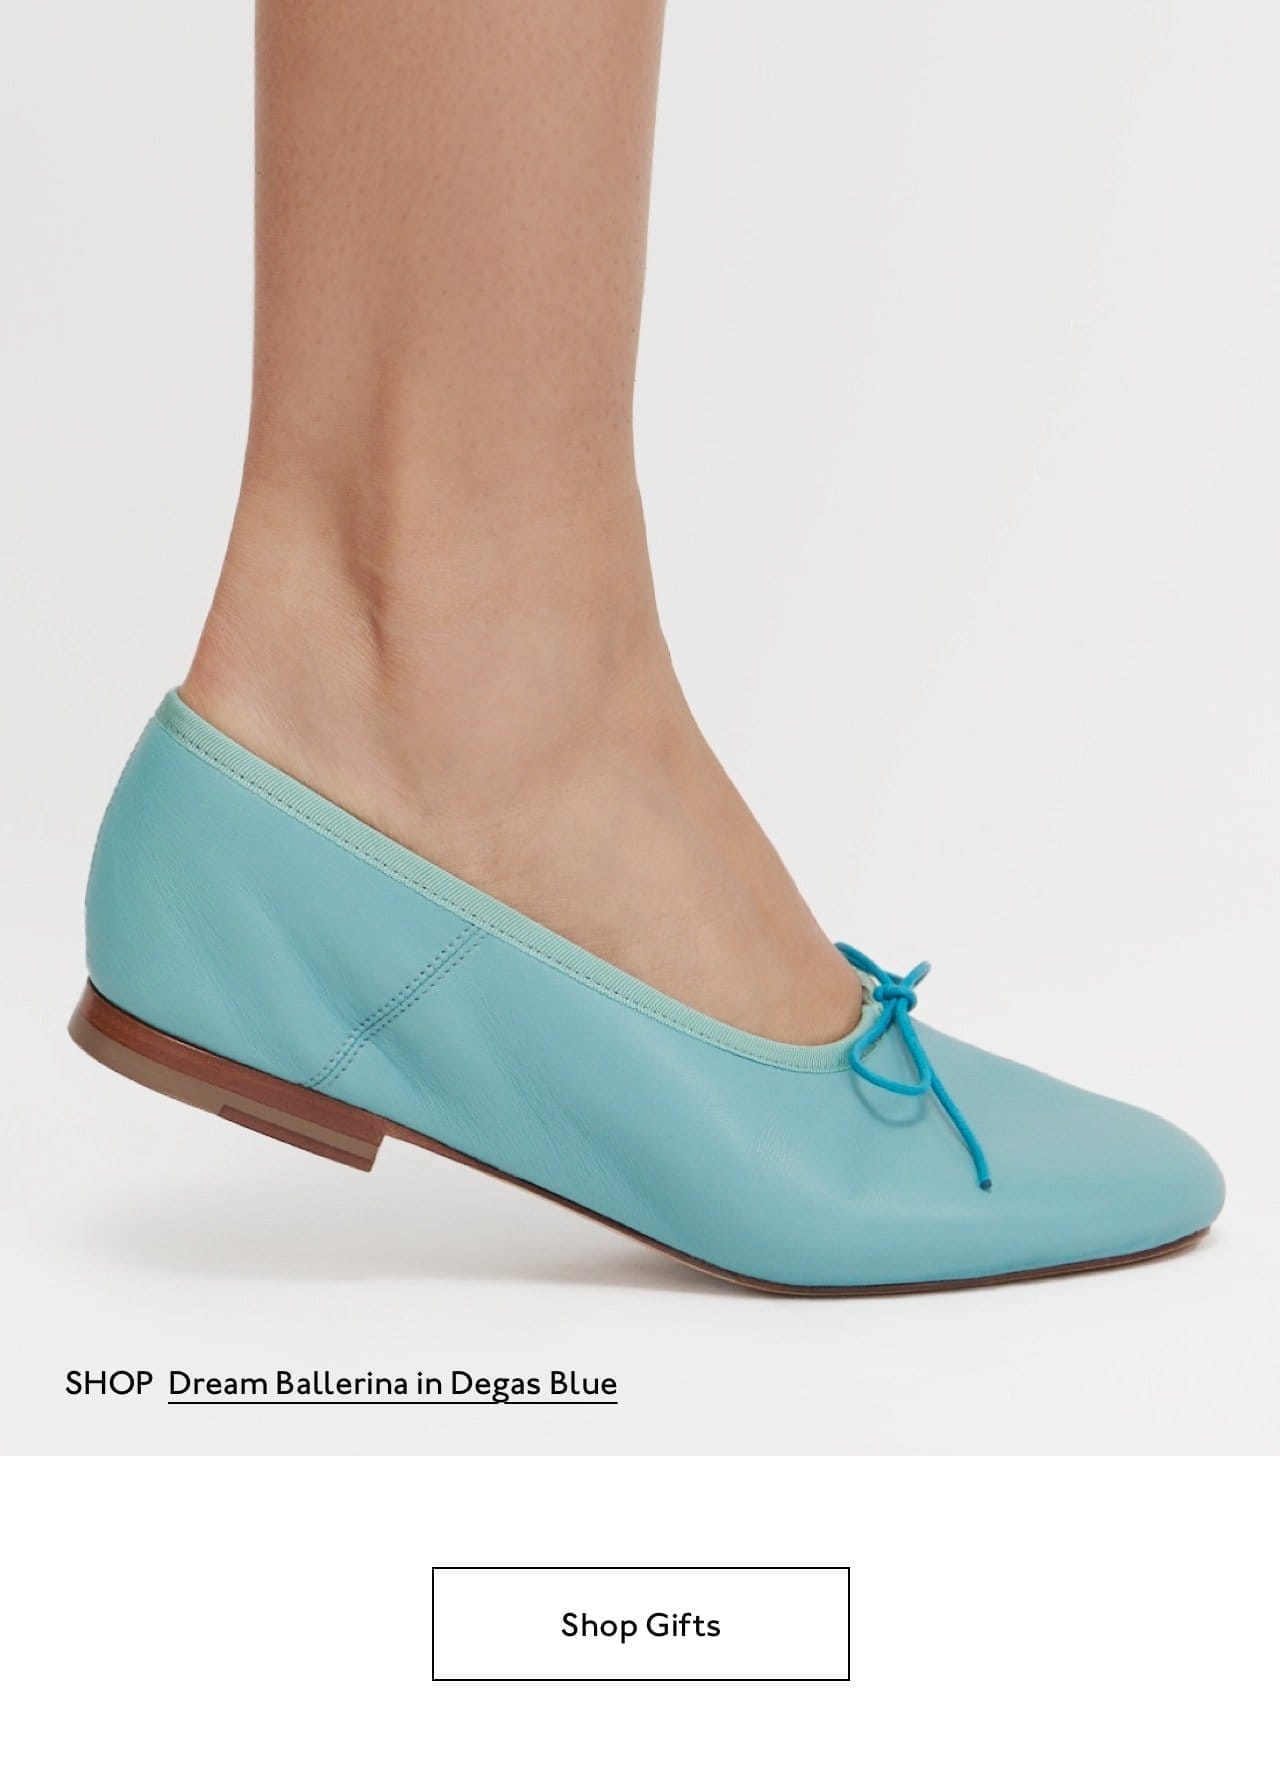 Shop the Dream Ballerina in Degas Blue and other gifts.